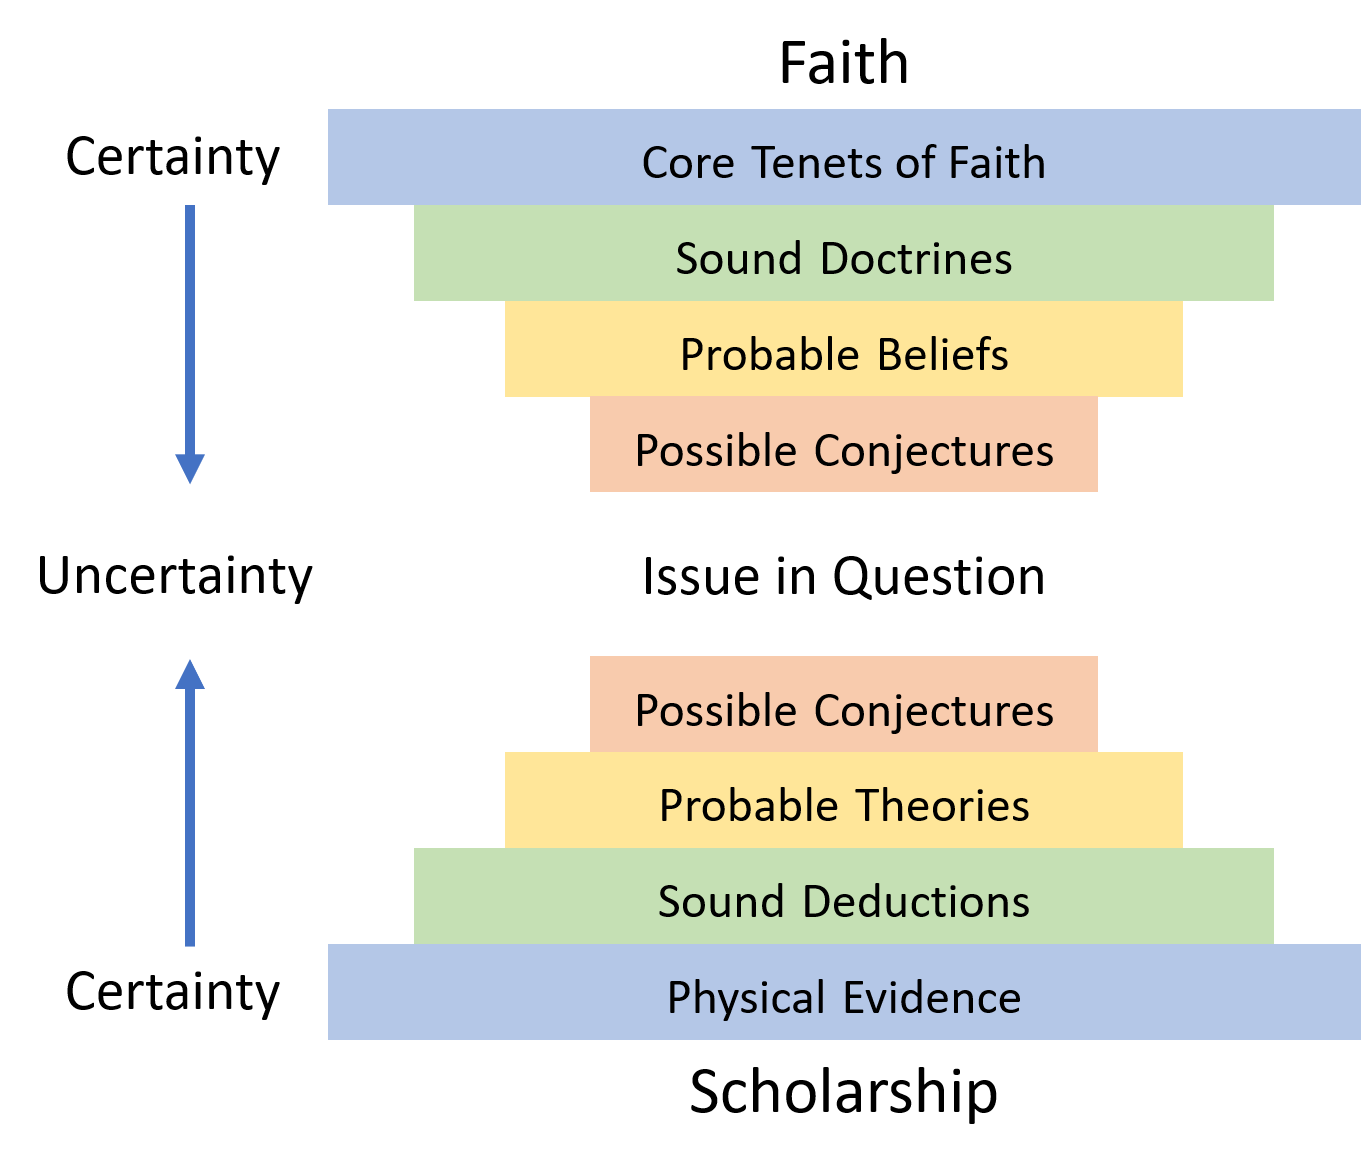 Hierarchy of certainty. On the faith side: Core tenants of faith, sound doctrines, probable beliefs, and possible conjectures. On the scholarship side: Physical evidence, sound deductions, probable theories, and possible conjectures